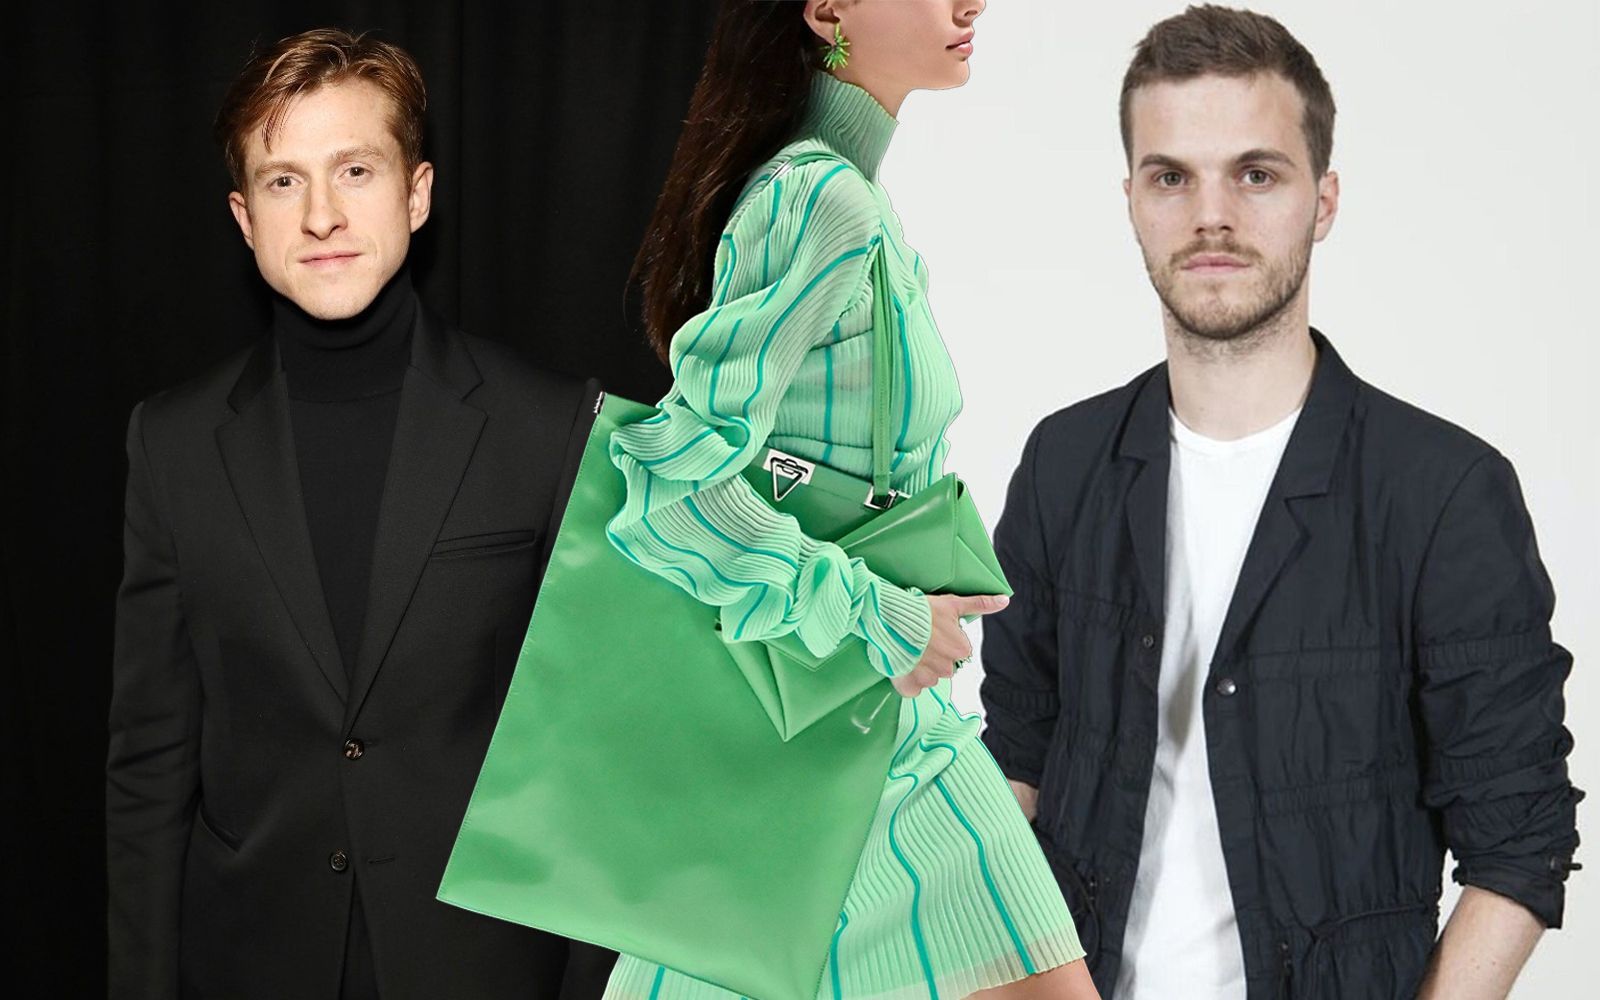 The story behind the appointment of Matthieu Blazy at Bottega Veneta